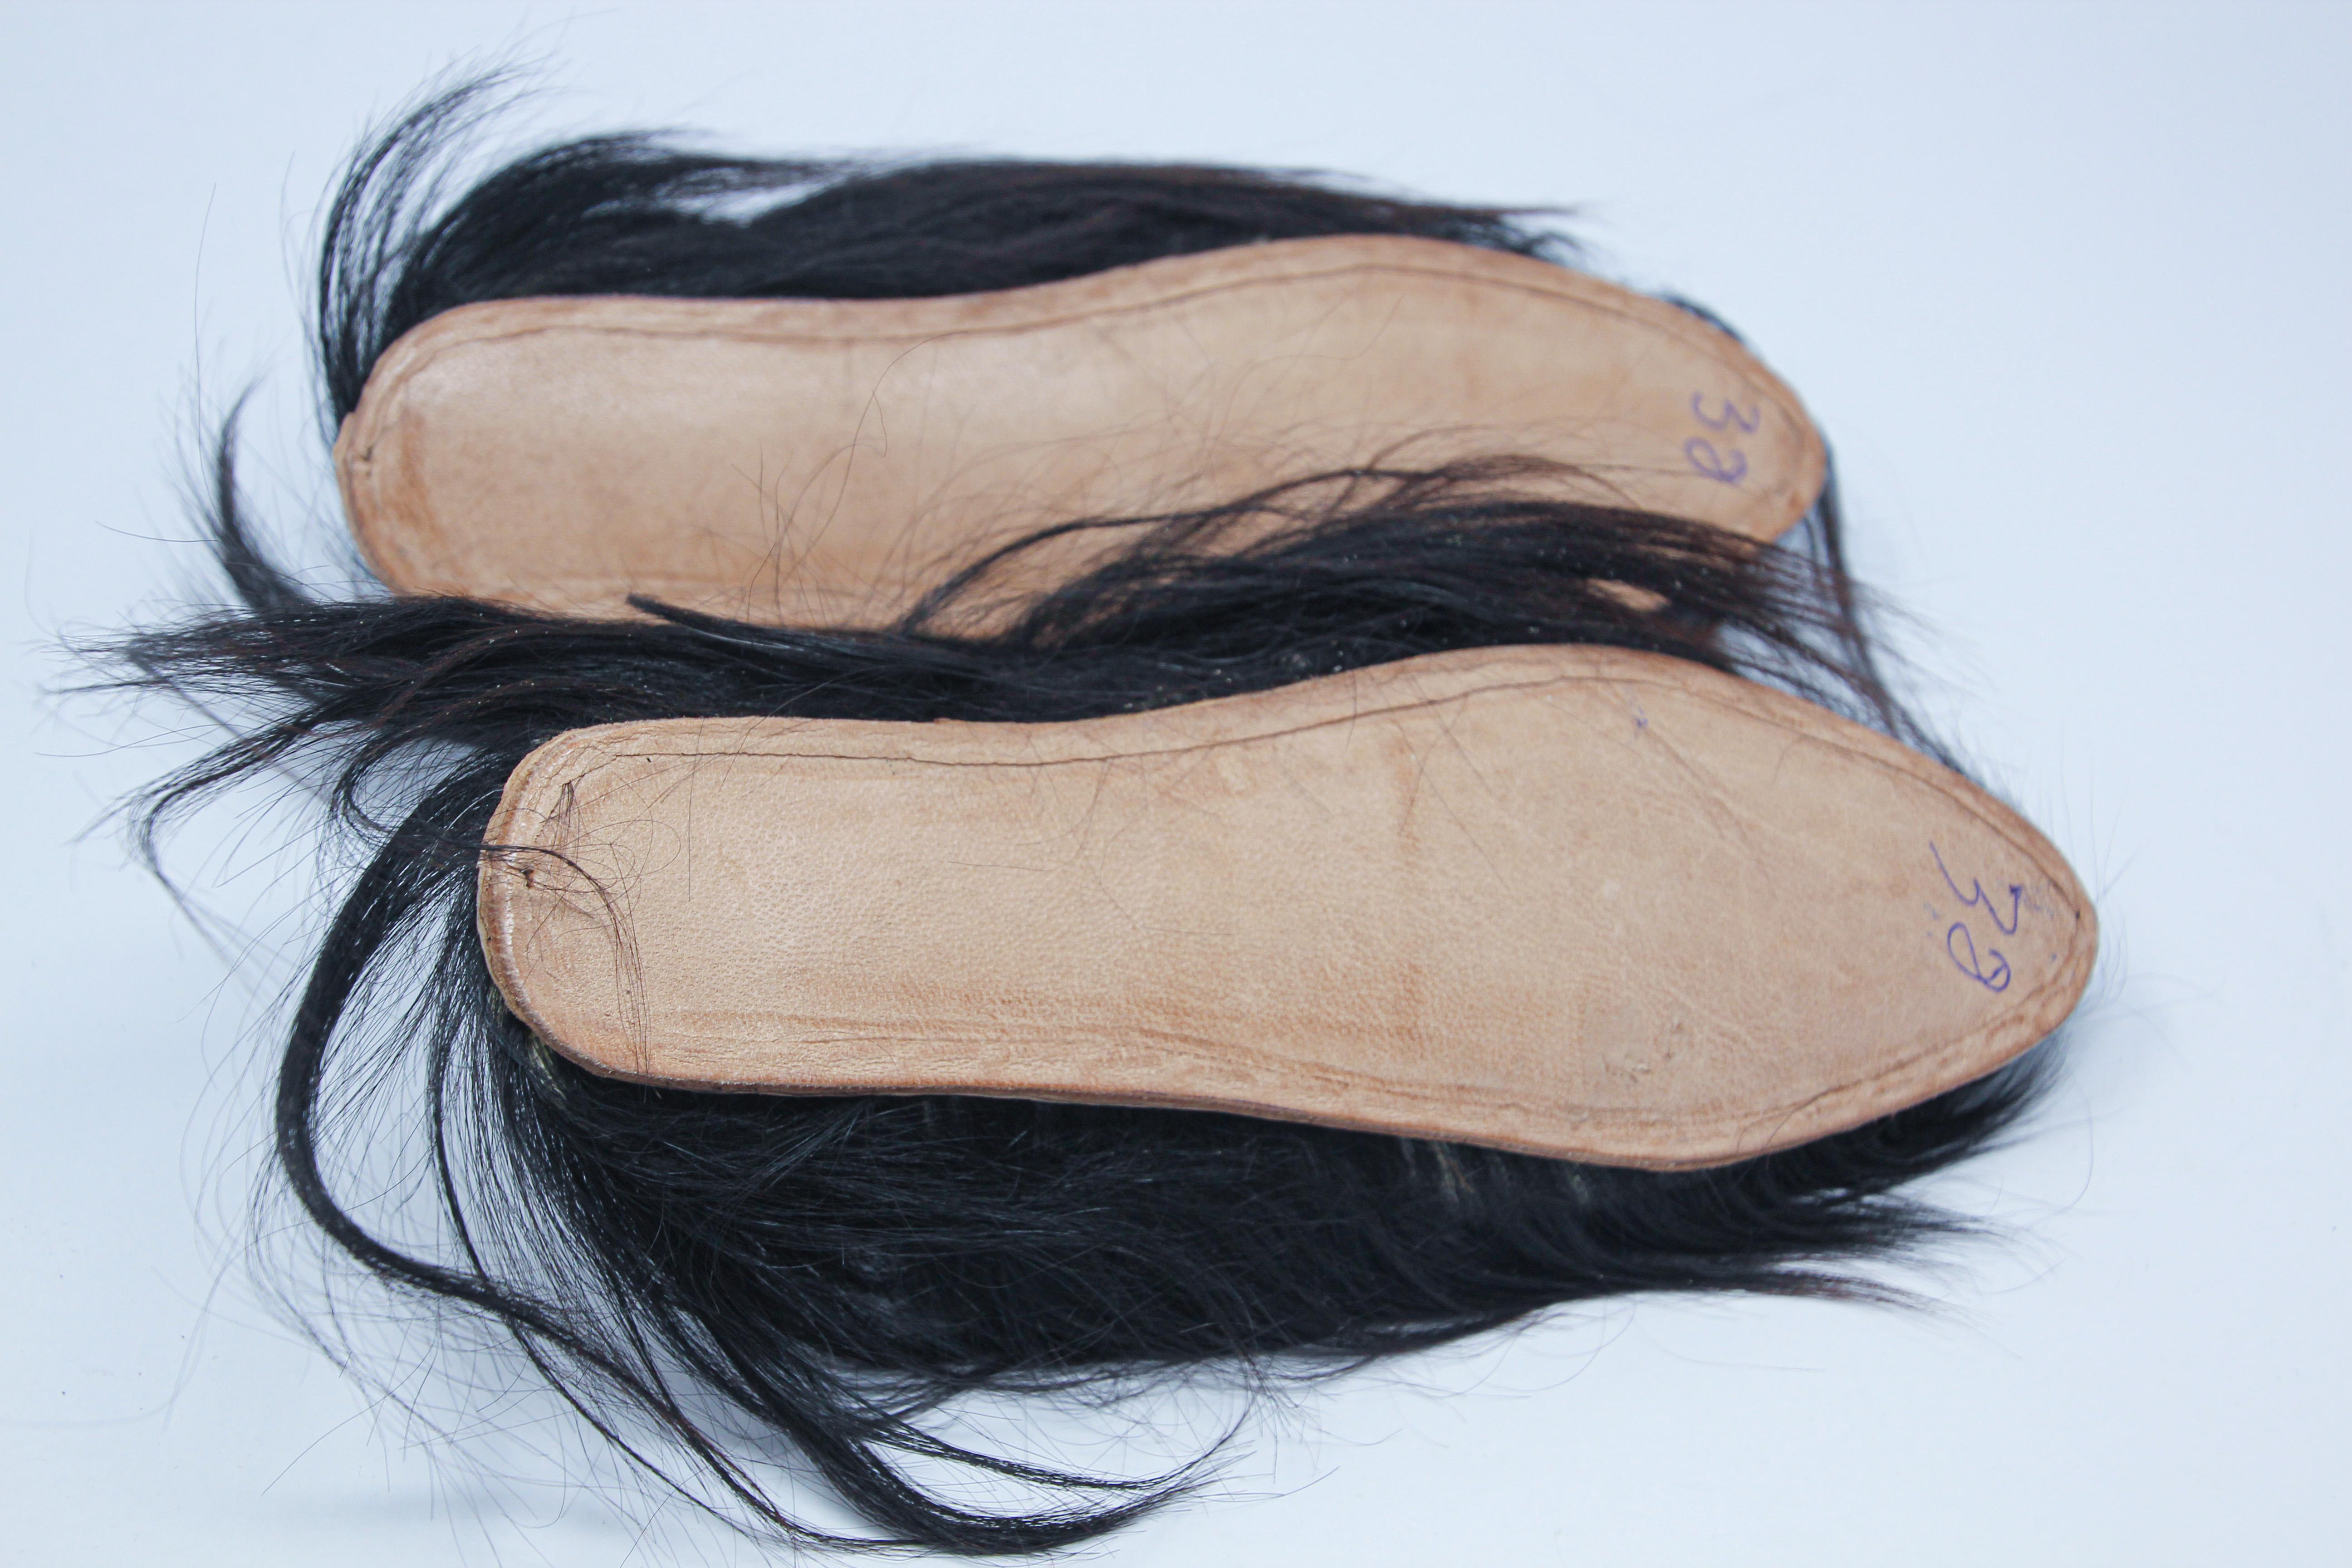 Bohemian Moroccan Black Goat Hair Slippers For Sale